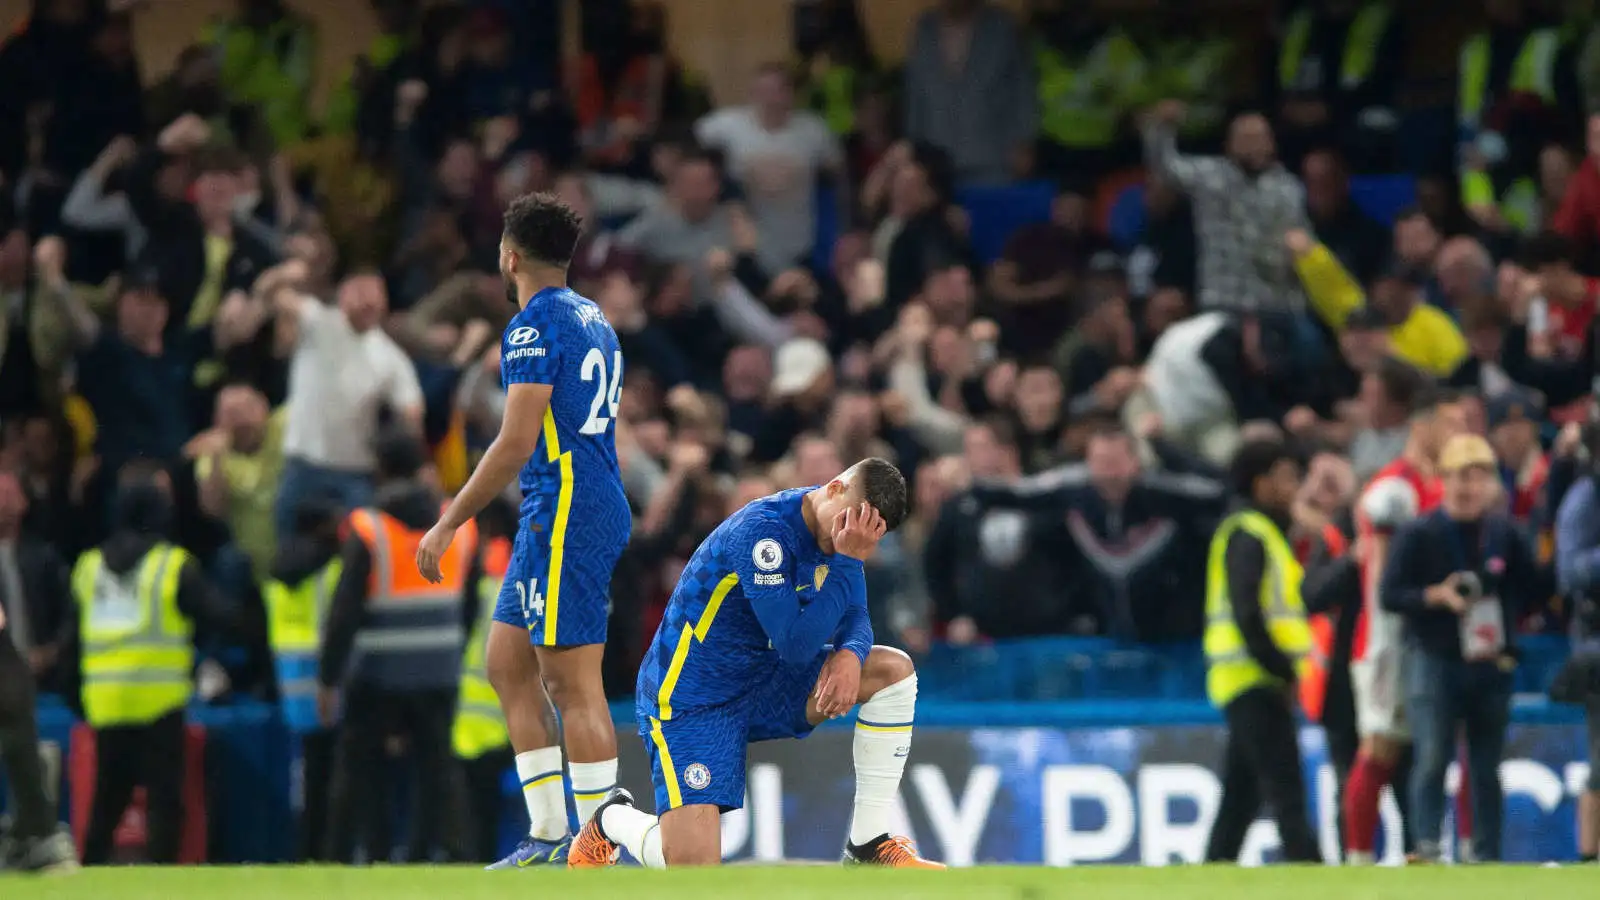 Chelsea players distraught after conceding to Arsenal